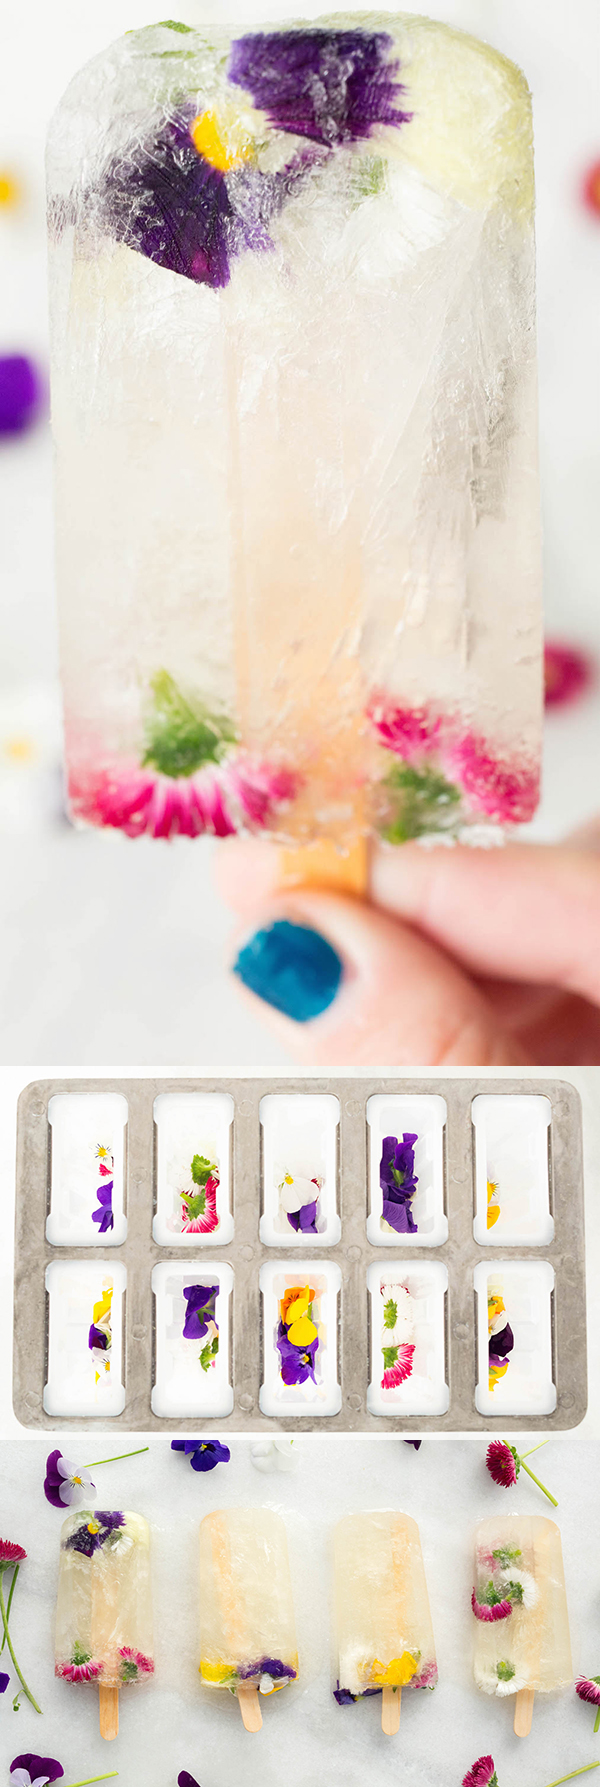 Champagne Popsicle recipe made with St. Germain and Edible Flowers. The perfect summer brunch treat!